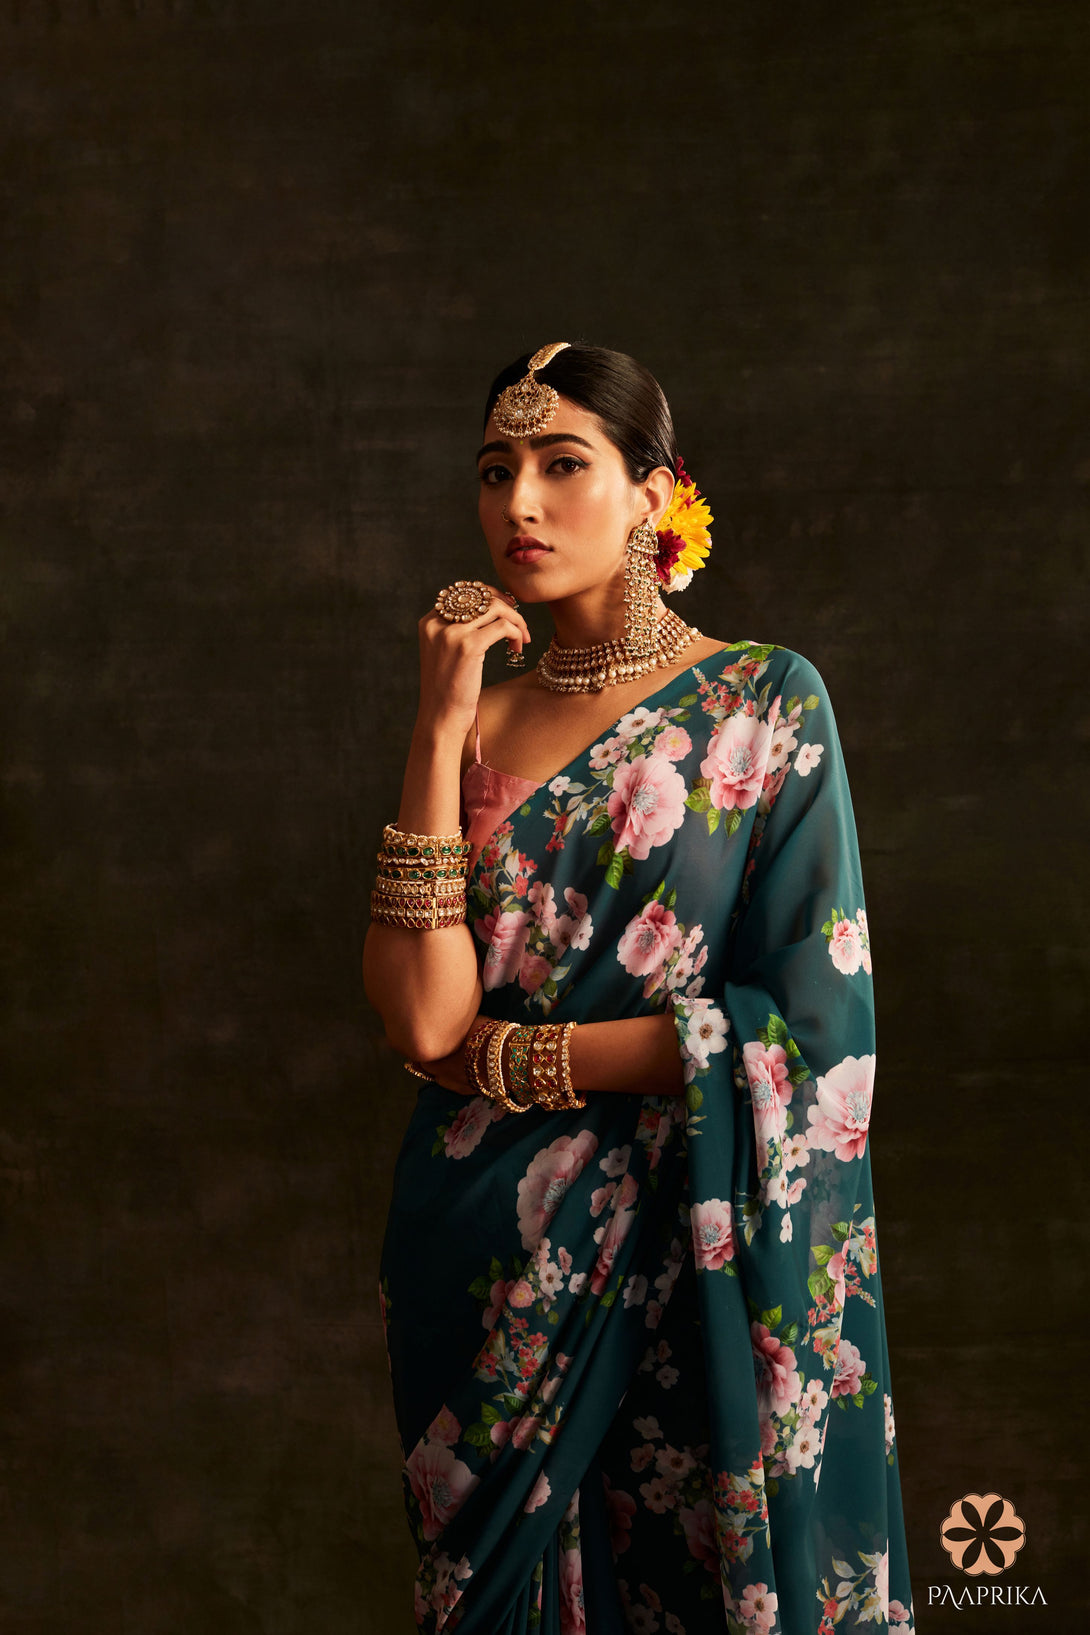 A stylish woman confidently wearing the Exquisite Teal Green Floral Printed Georgette Saree, embodying grace and elegance with the saree's serene floral blooms. The saree's floral prints enhance her overall look, radiating sophistication and charm.